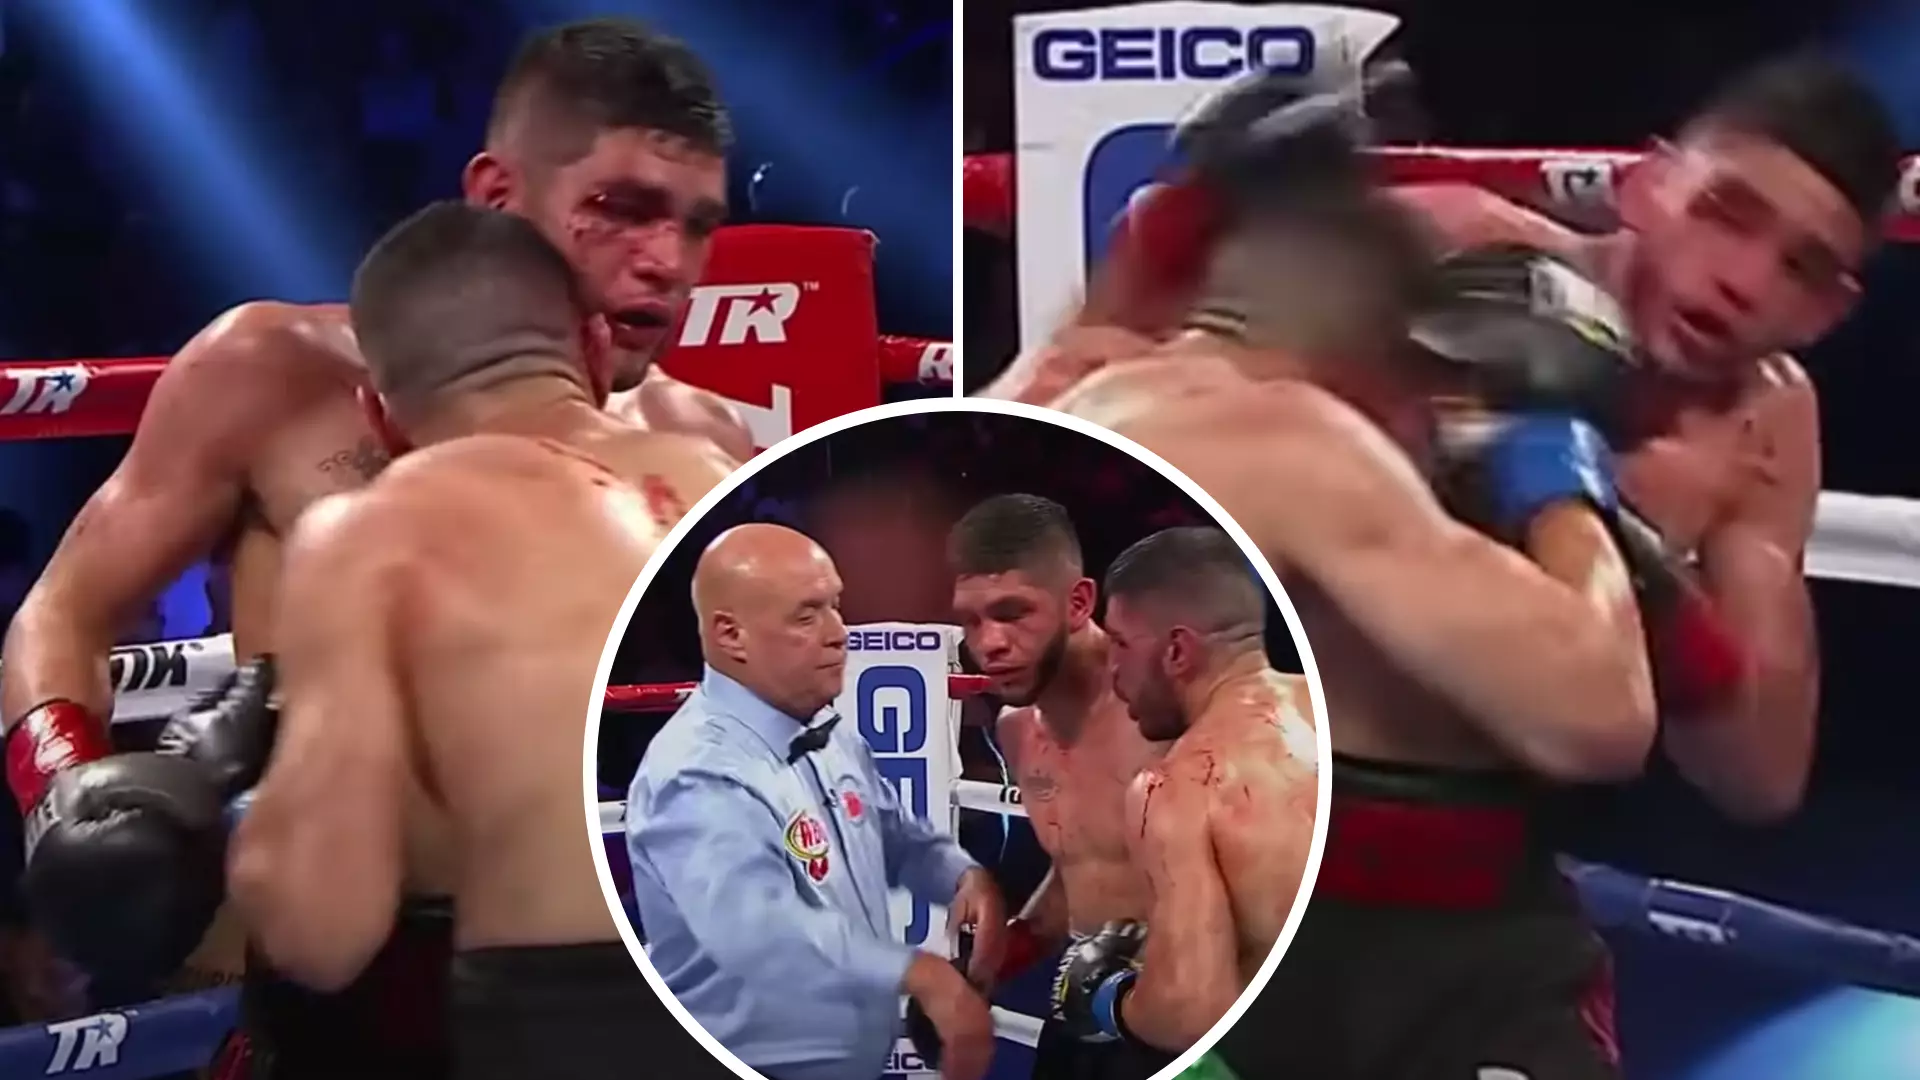 The Fourth Round Between Alex Saucedo And Lenny Zappavigna Was One Of The Most Brutal In History